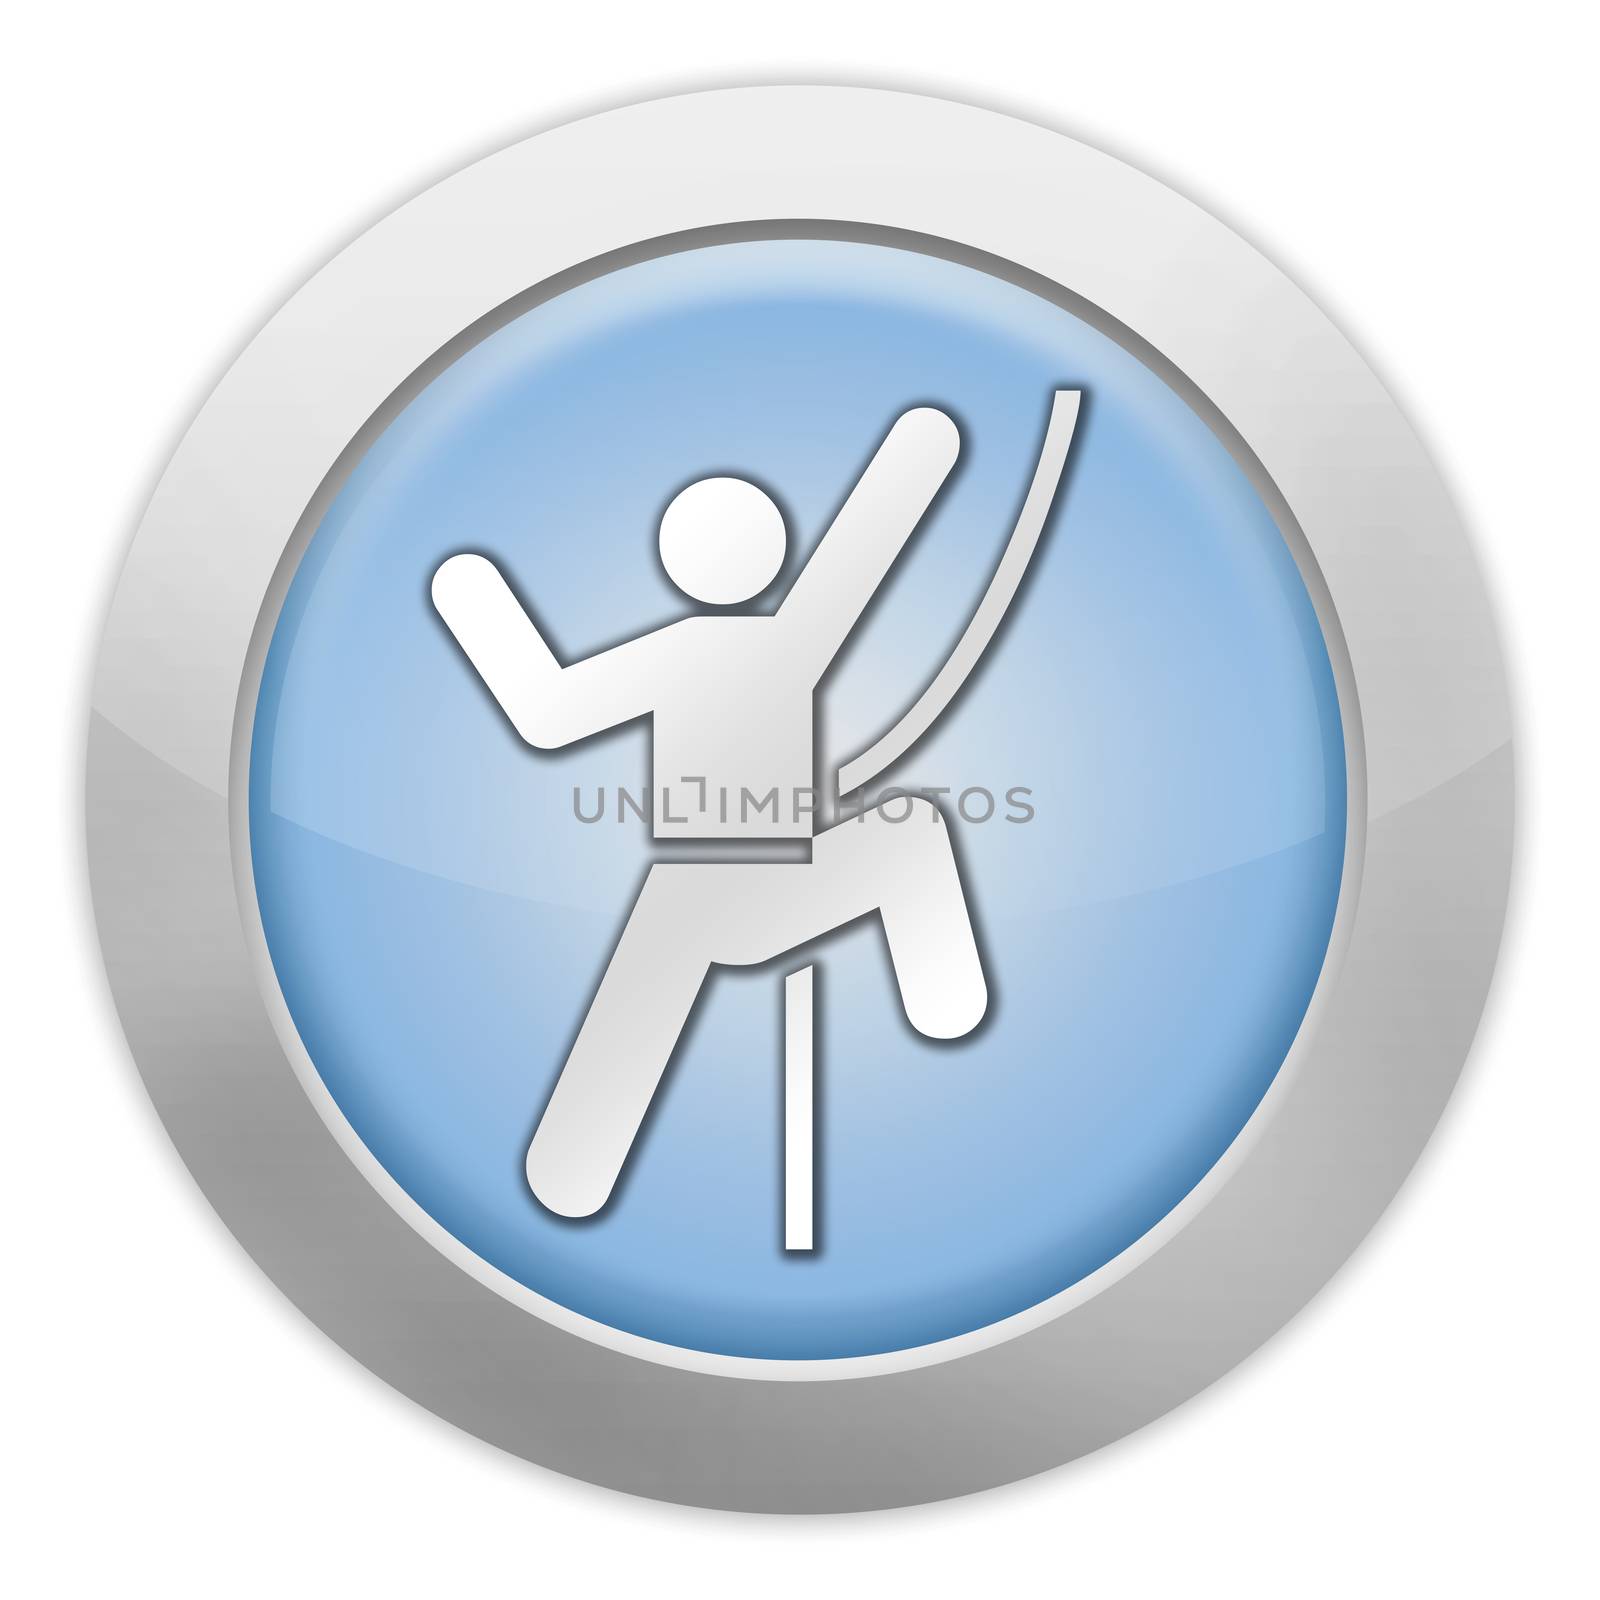 Icon, Button, Pictogram Rock Climbing by mindscanner